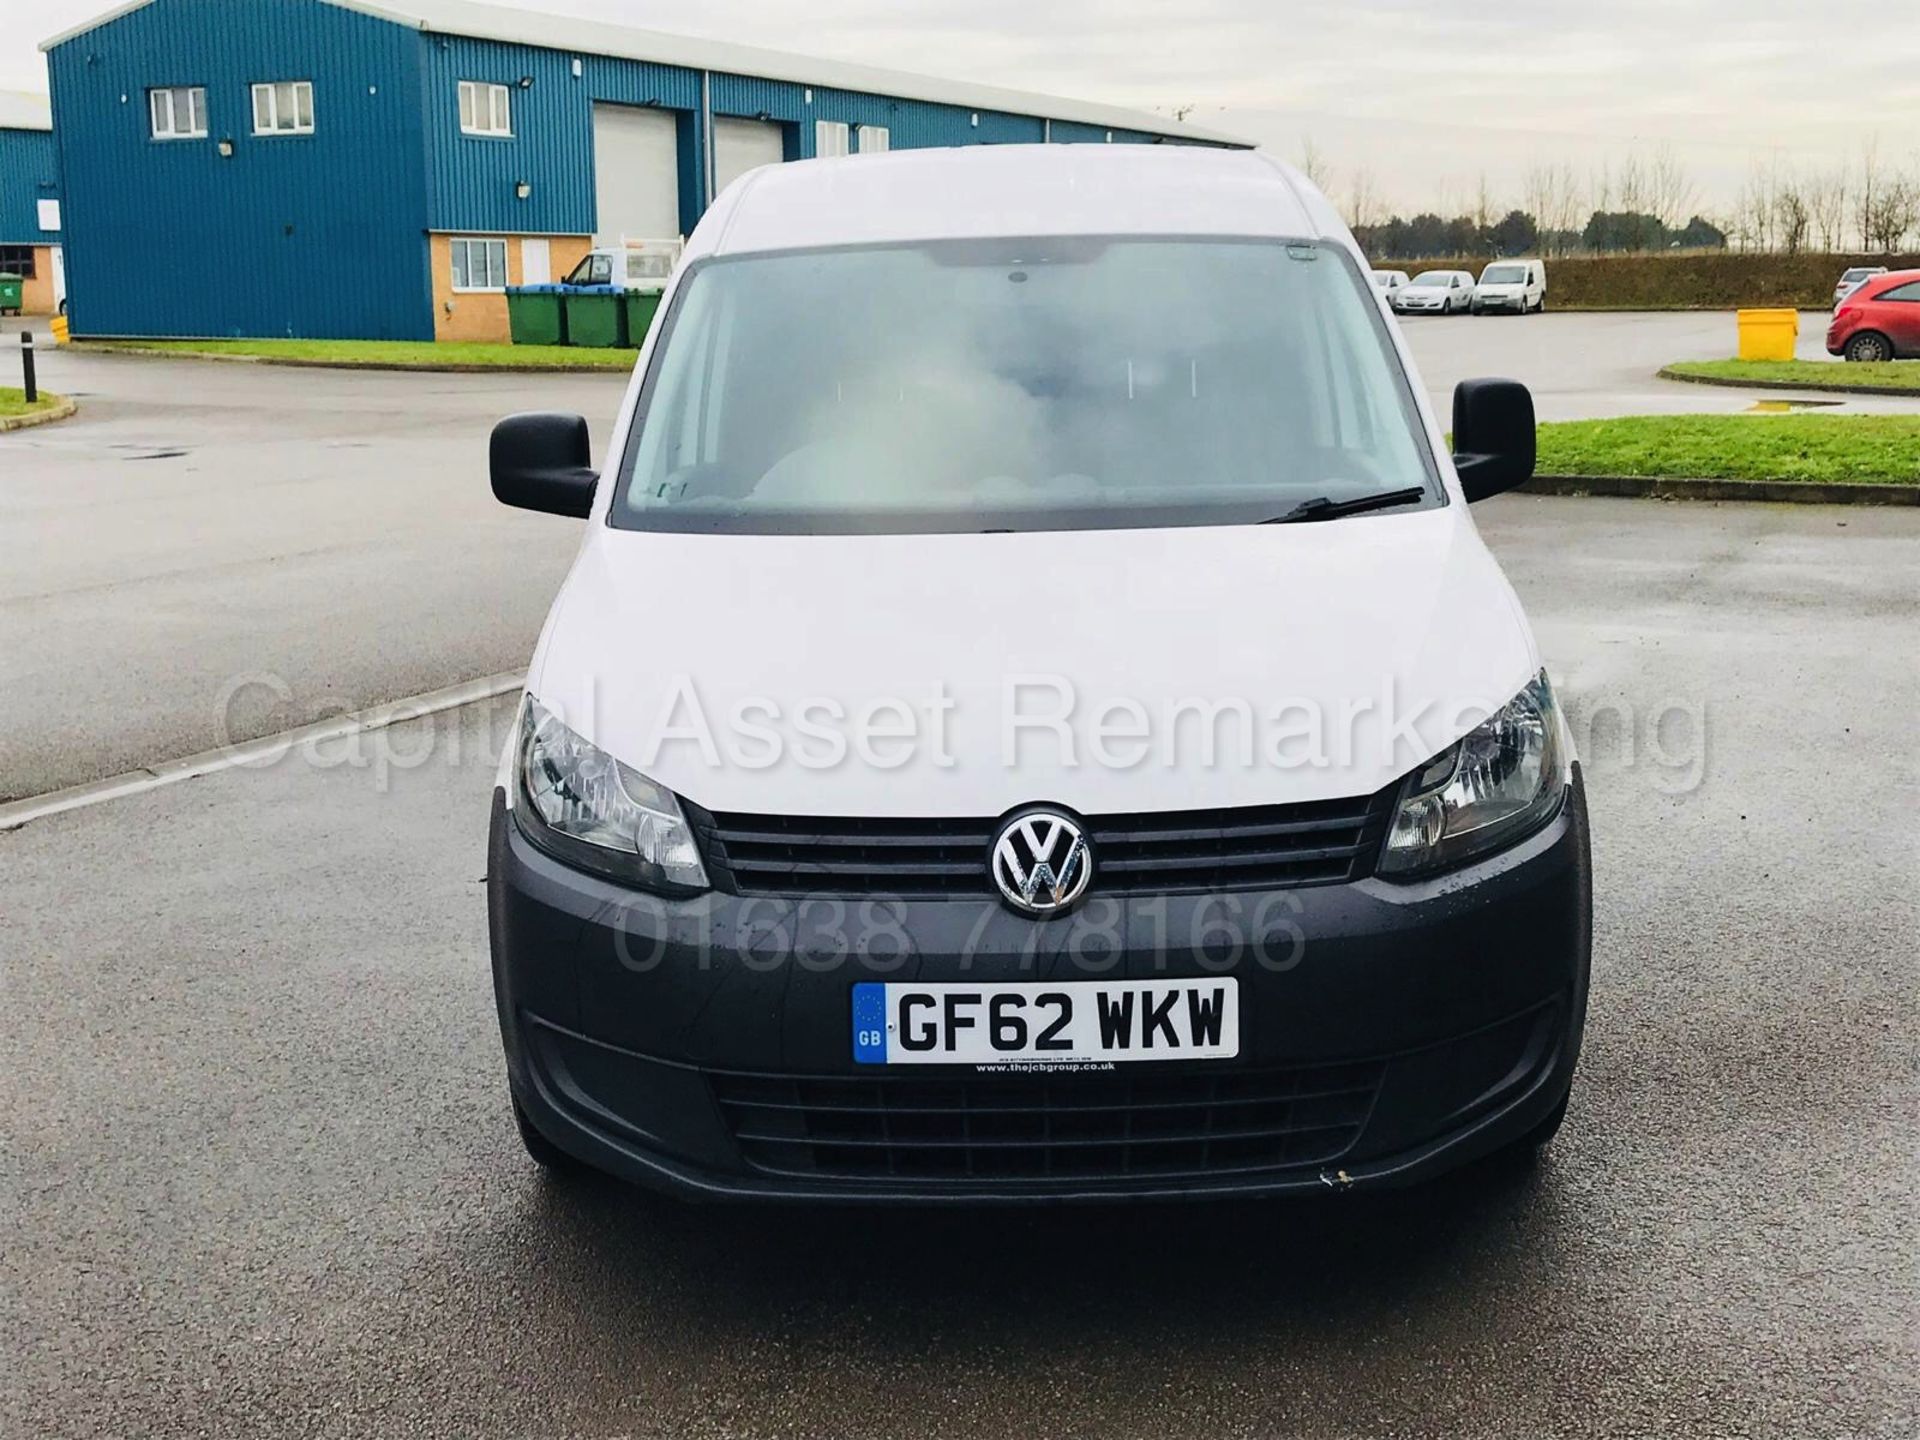 (On Sale) VOLKSWAGEN CADDY C20 'MAXI LWB' (2013 MODEL) '1.6 TDI - 102 BHP' *AIR CON - STOP / START* - Image 2 of 22